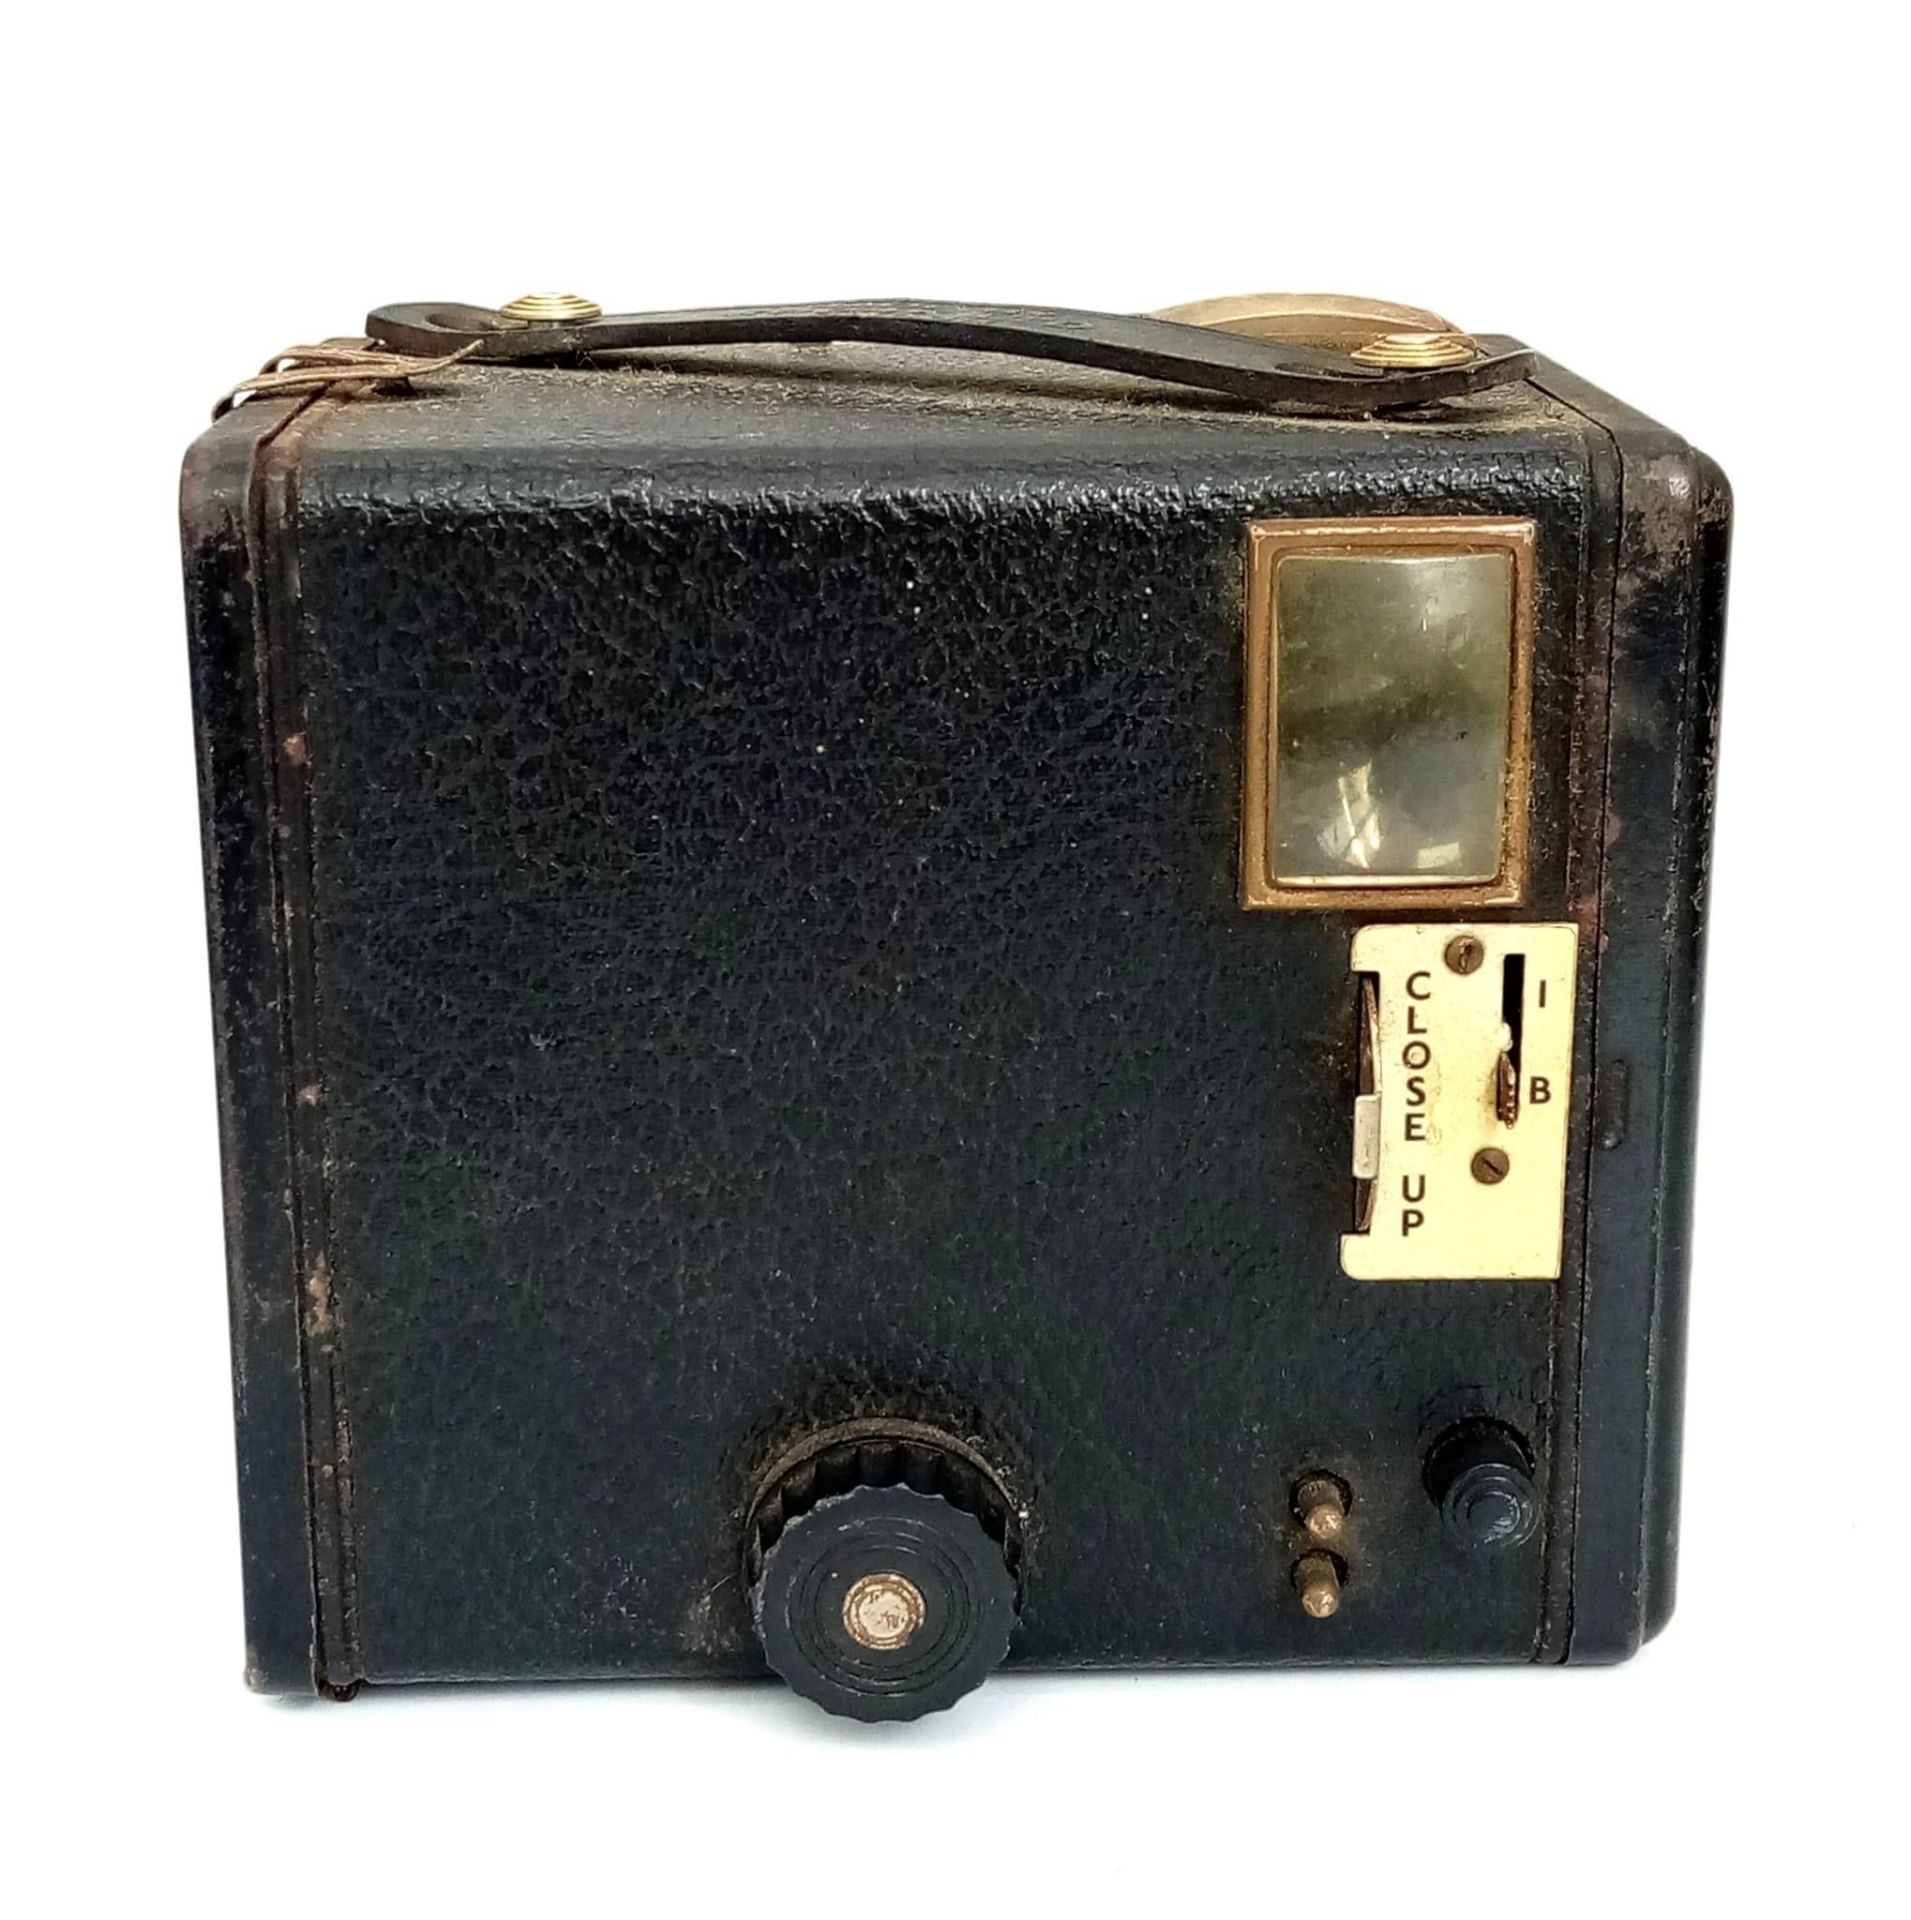 Two Vintage Kodak Cameras. A Kodak Brownie 127 (with case) and a Six-20 Model D. A/F - Image 2 of 6